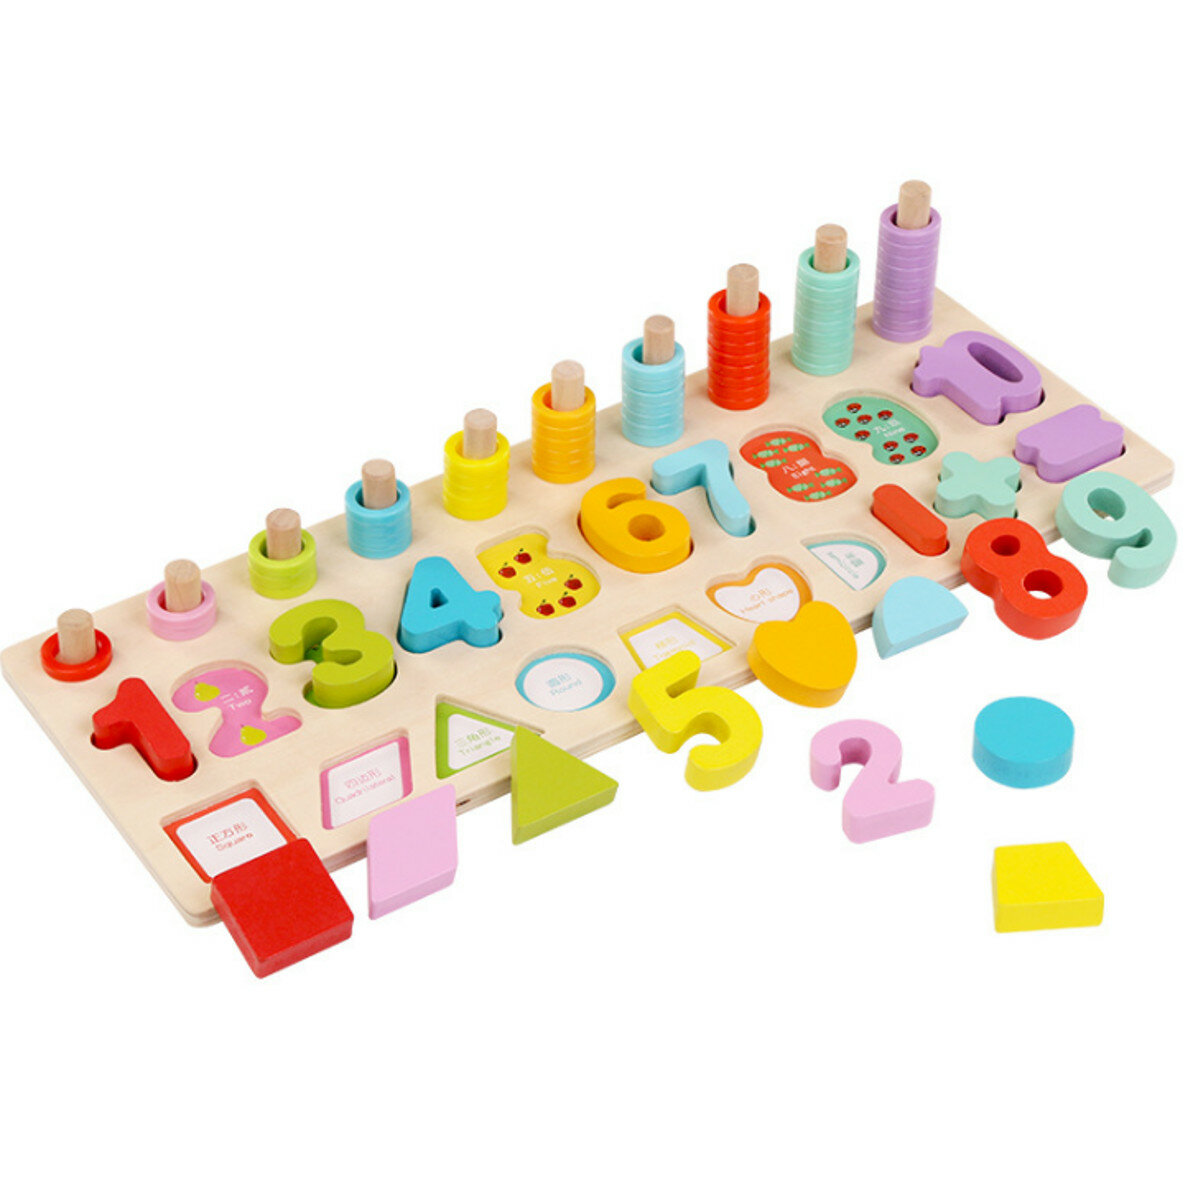 

Kids Wooden Math Puzzle Toys Numbers Learning Hand-Eye Coordination Educational Games